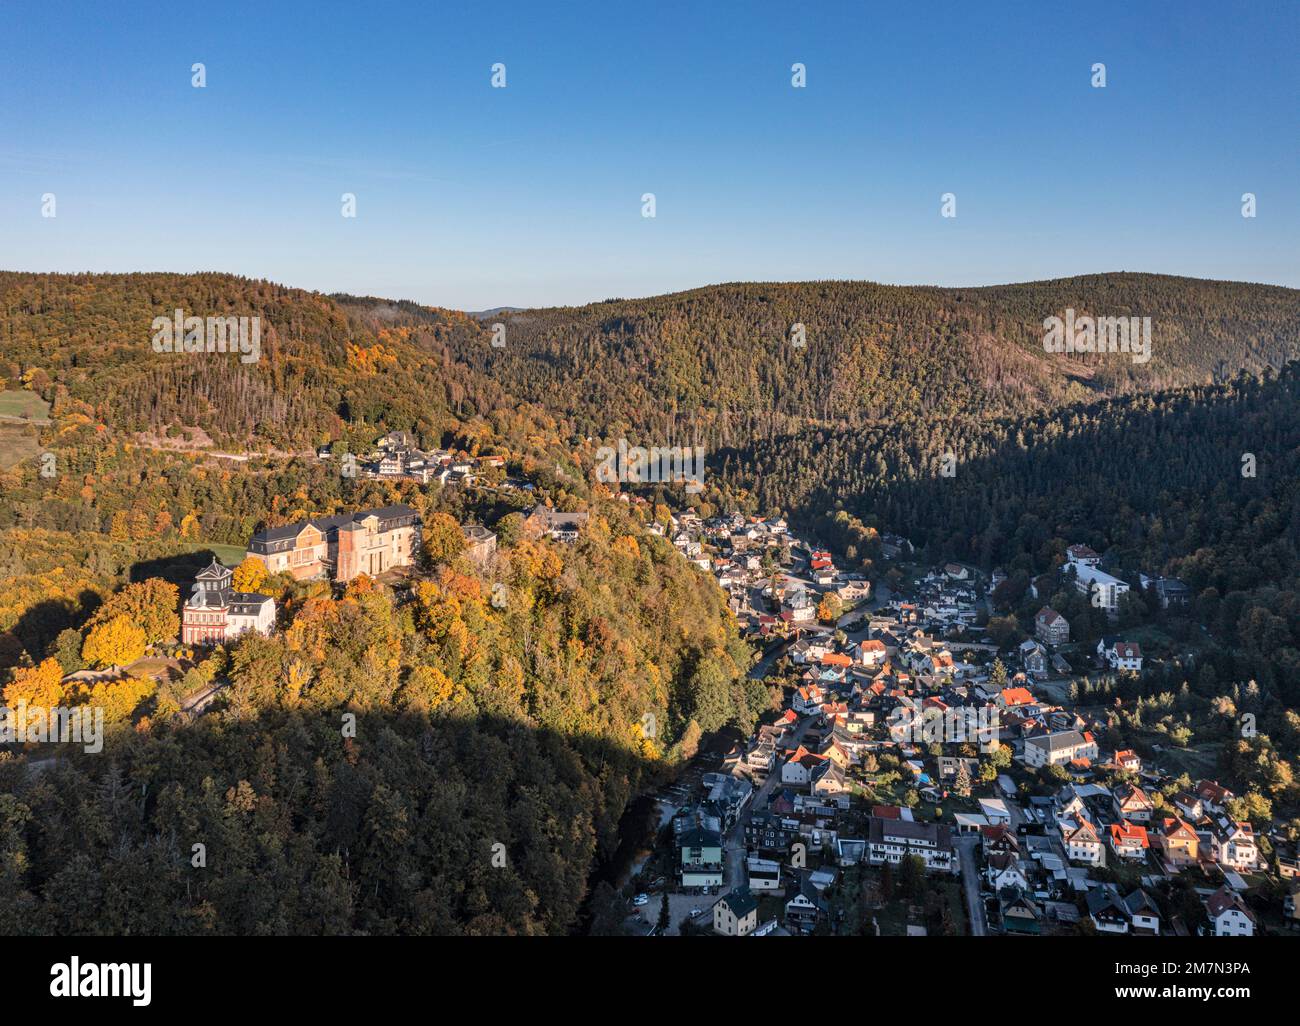 Germany, Thuringia, Schwarzburg, small town, castle, valley, mountains, forest, overview, morning light Stock Photo